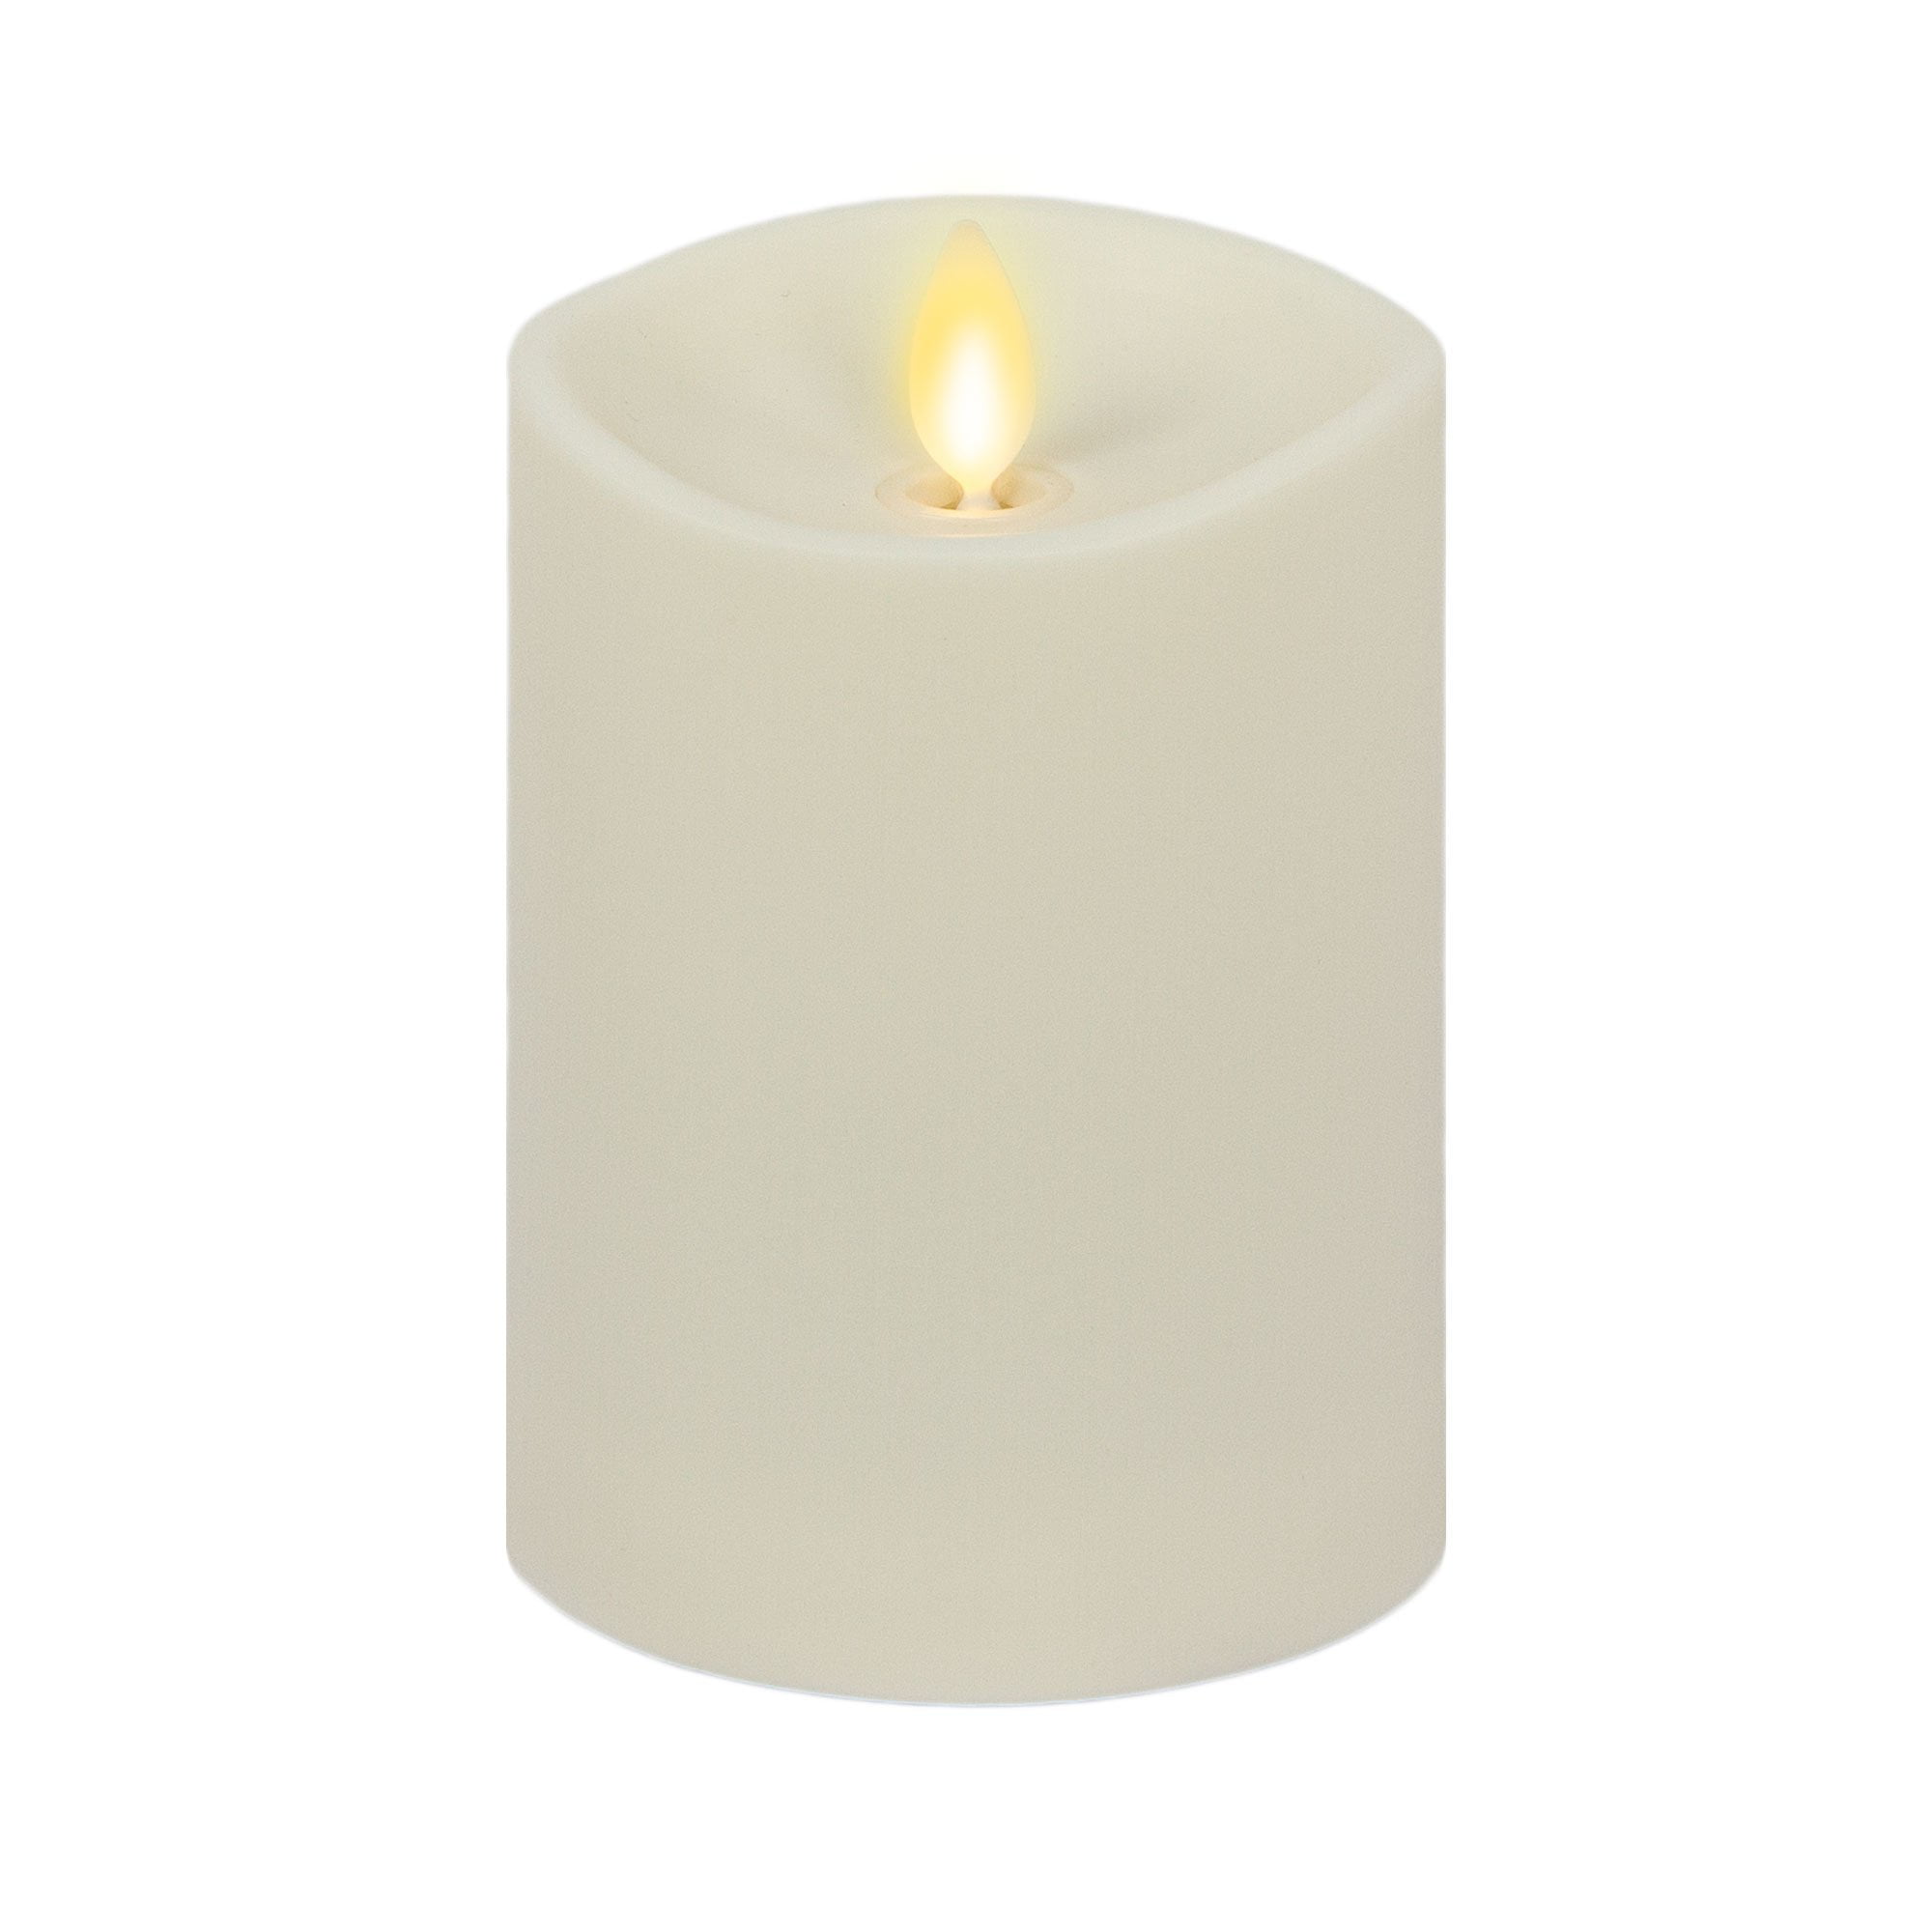 Pillar Candle Flicker Flame 3" x  5" Cream by Candle Impressions 